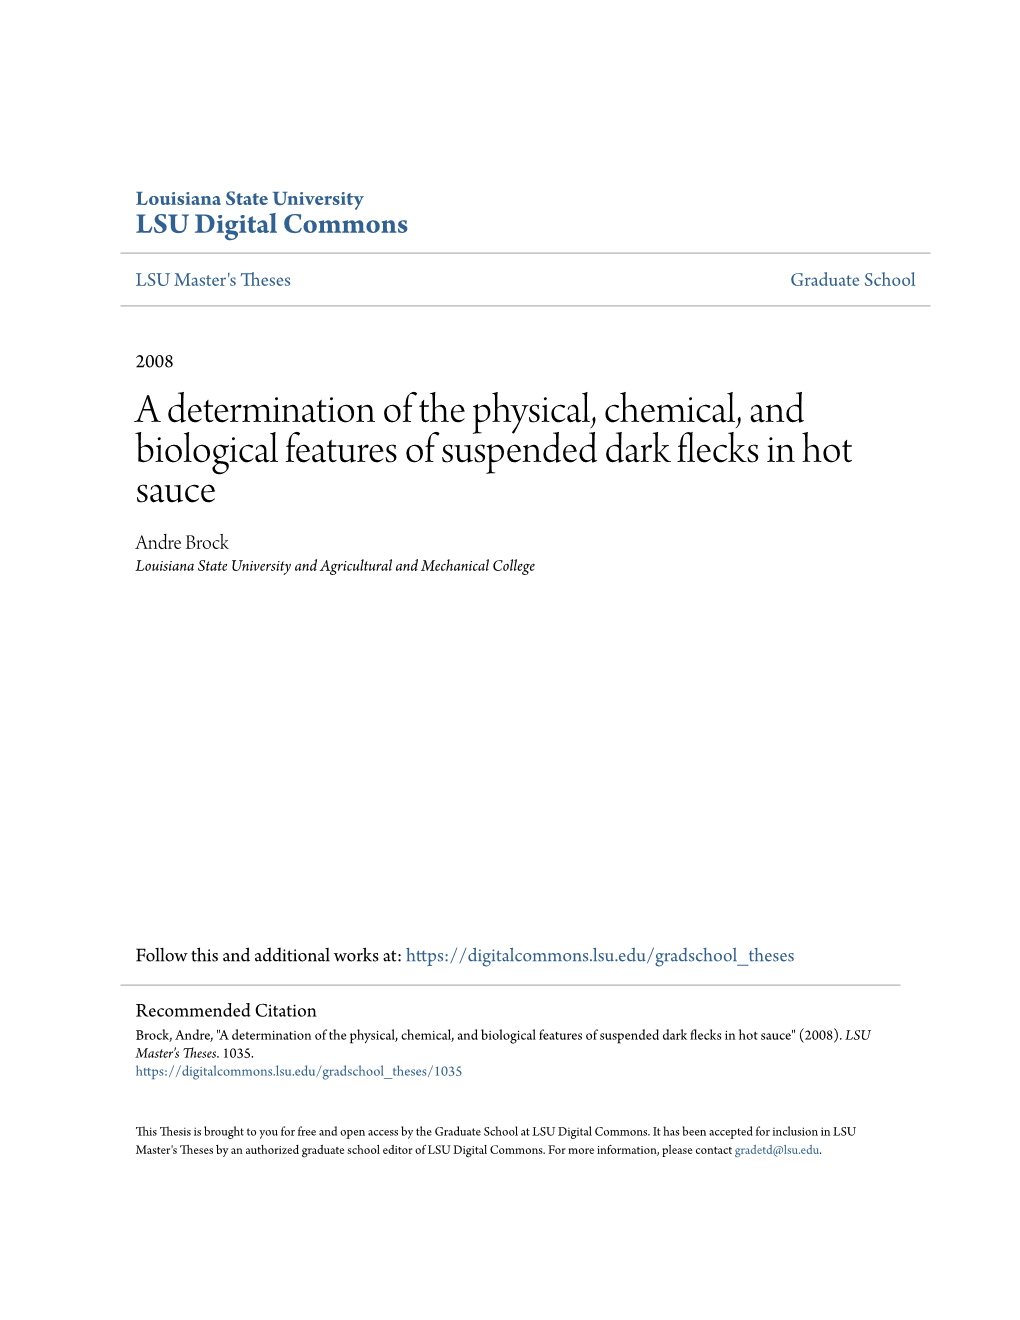 A Determination of the Physical, Chemical, and Biological Features Of